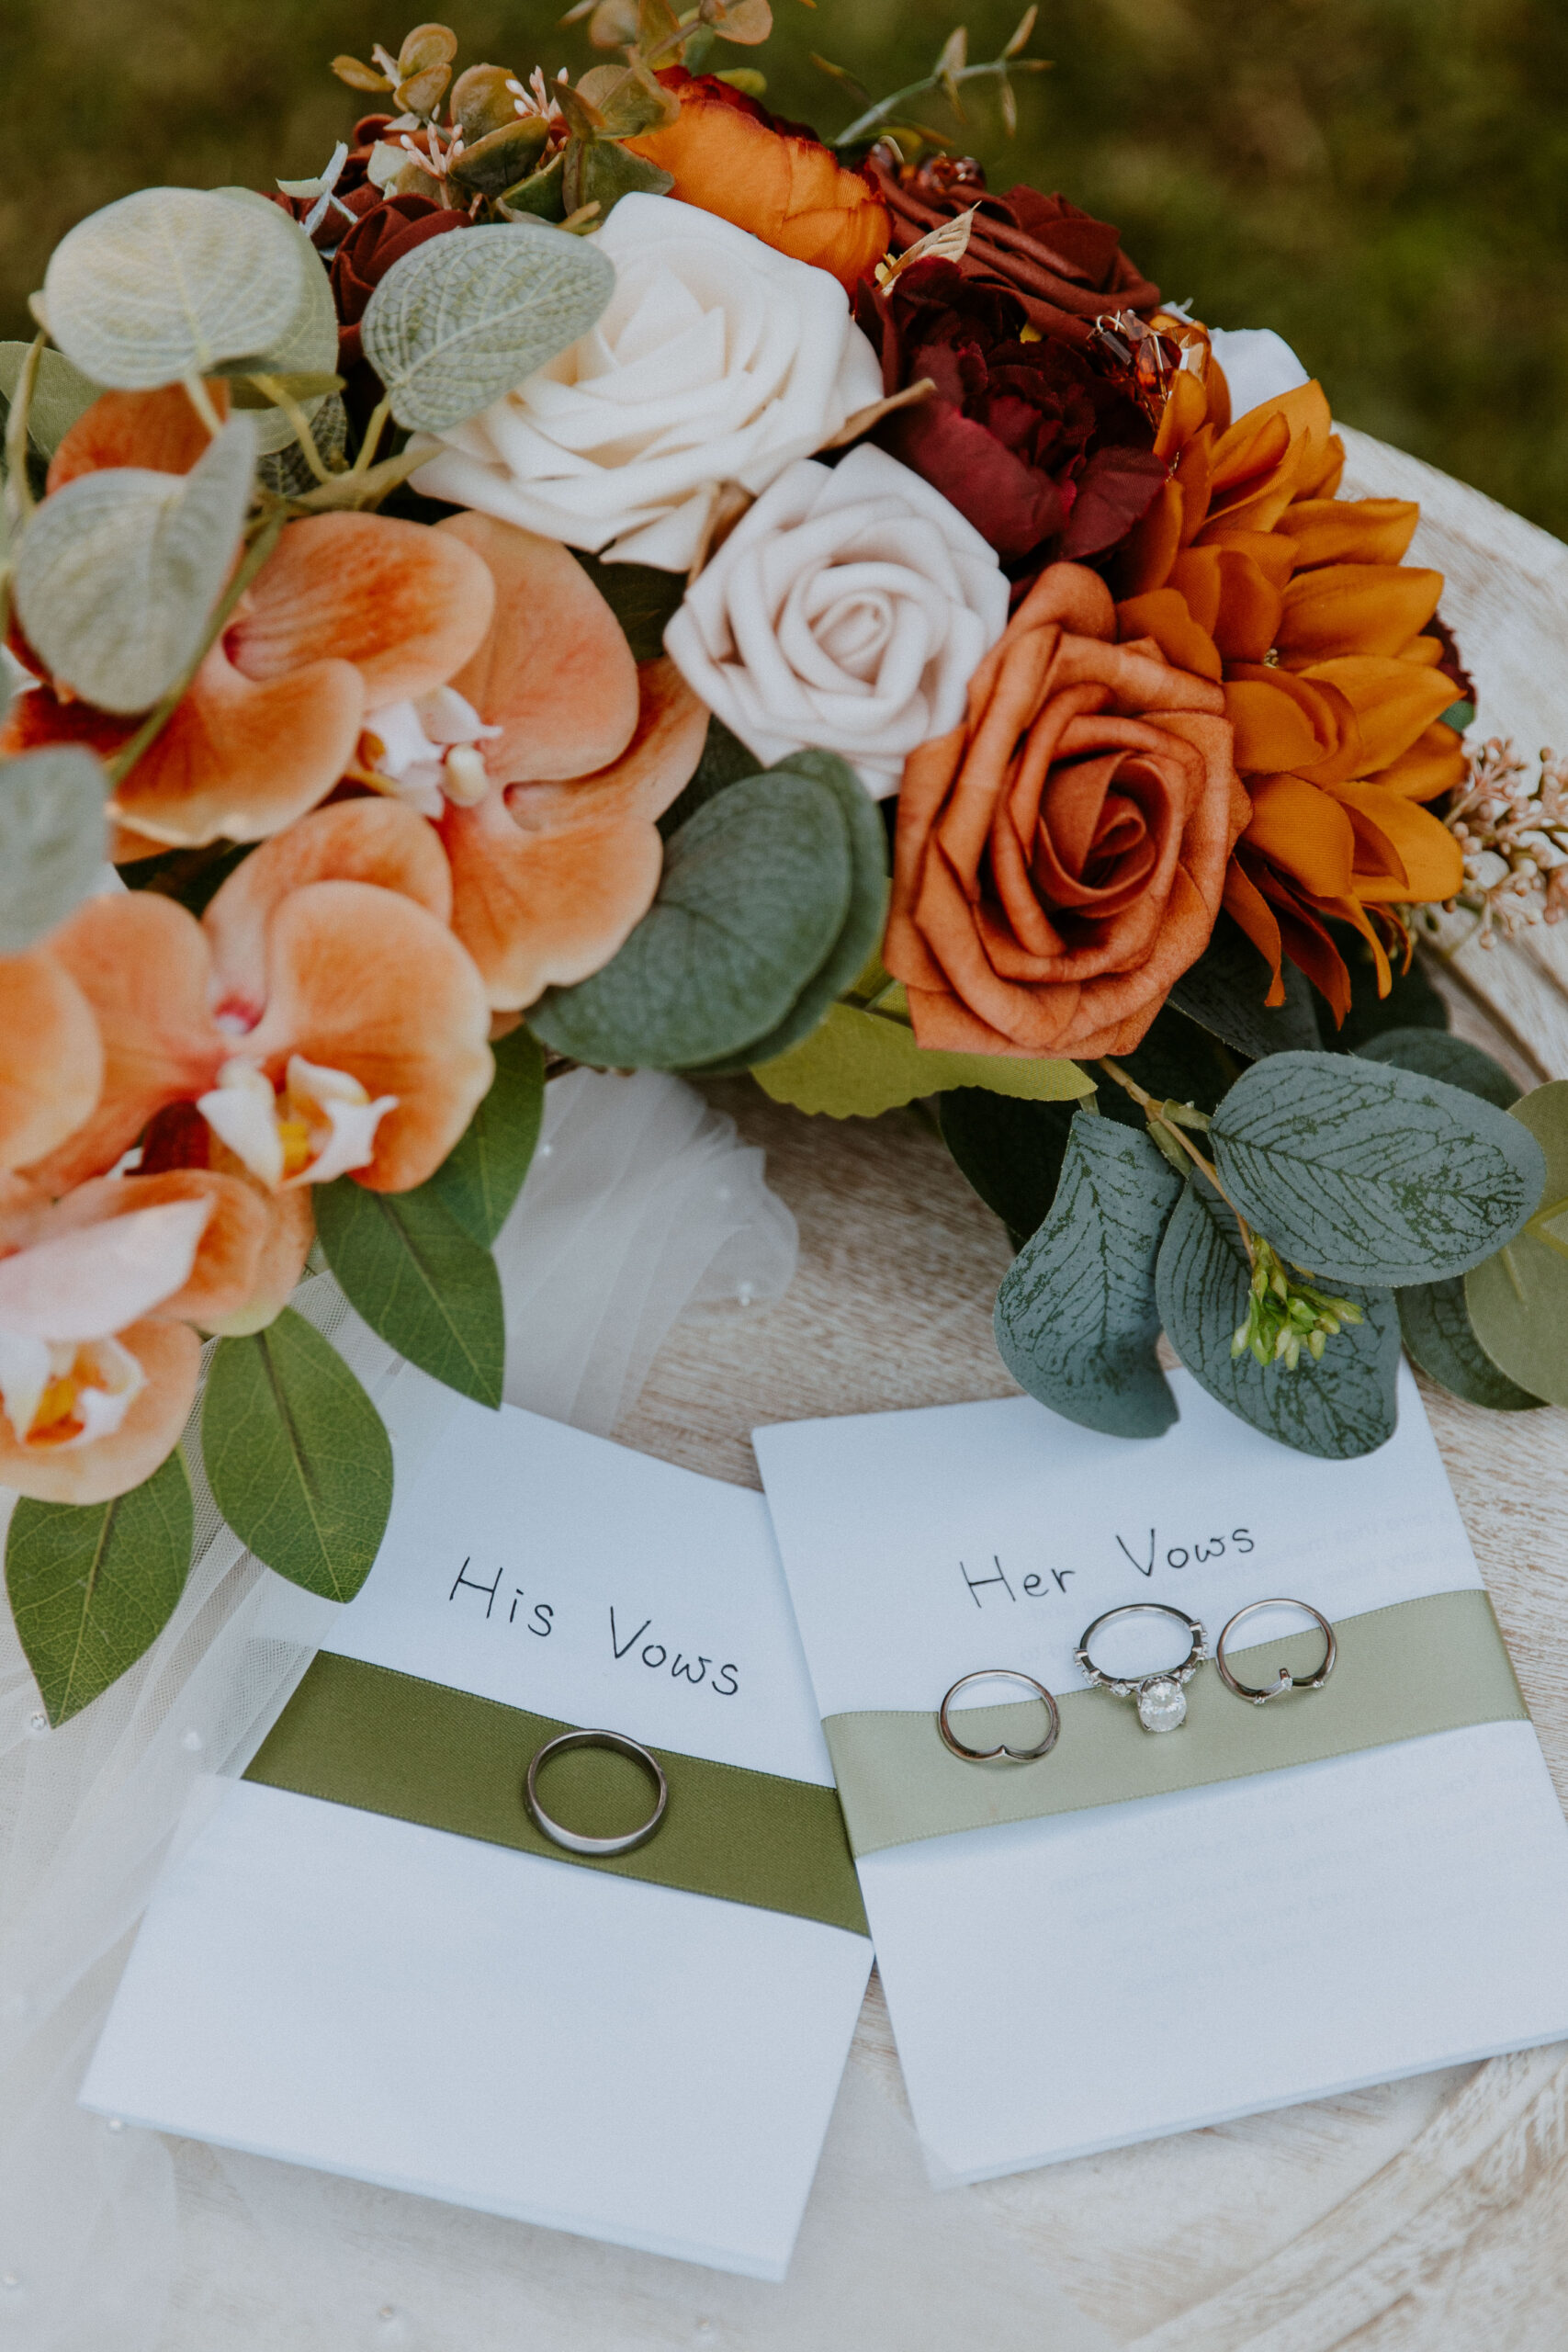 A wedding setup featuring vow booklets labeled "his vows" and "her vows" with rings on top, placed beside a bouquet of flowers.